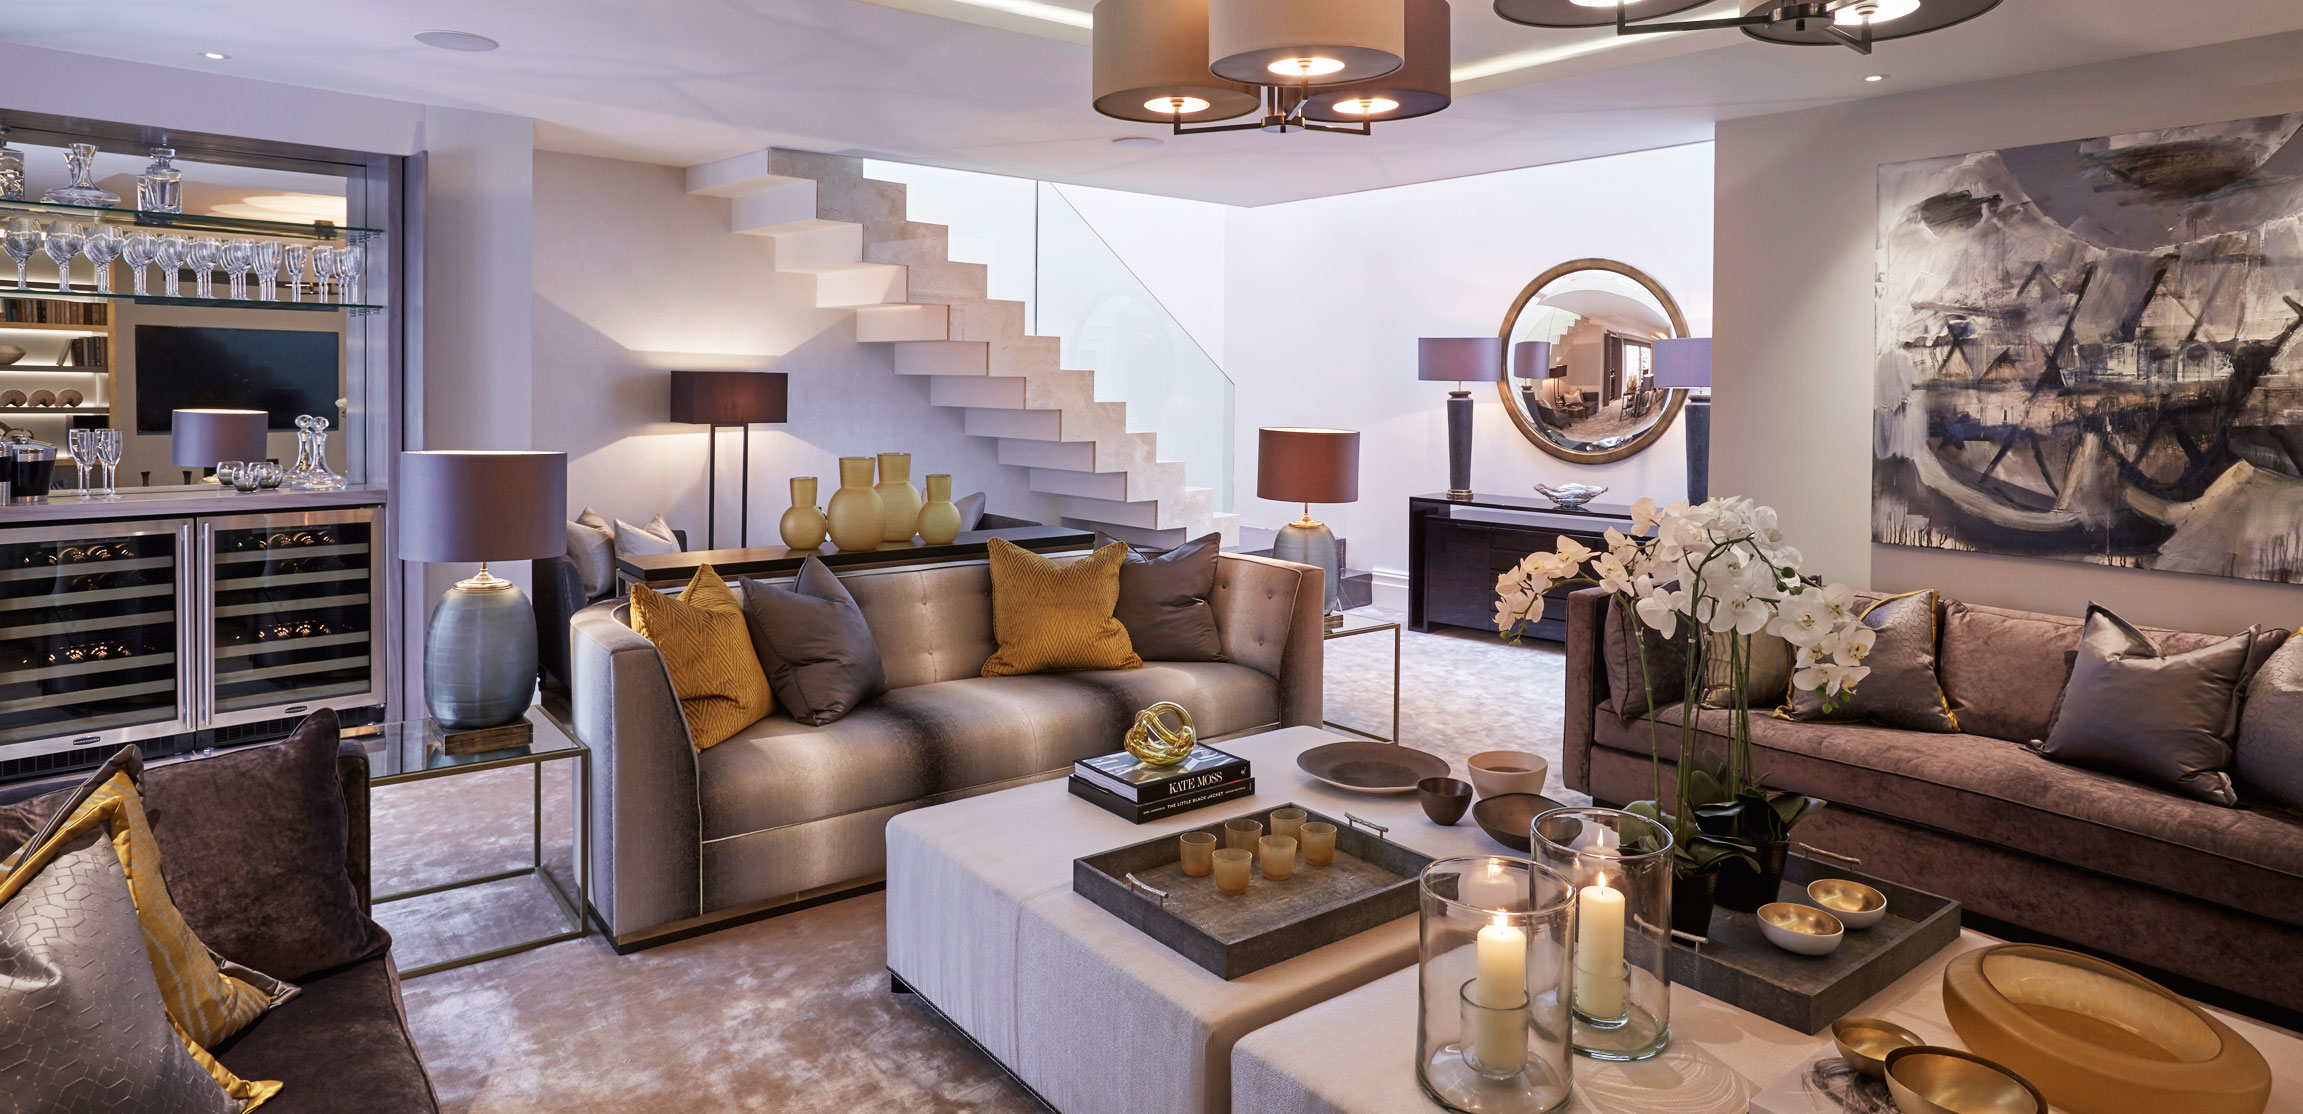 Family room at the Wilton Street house by Residence One